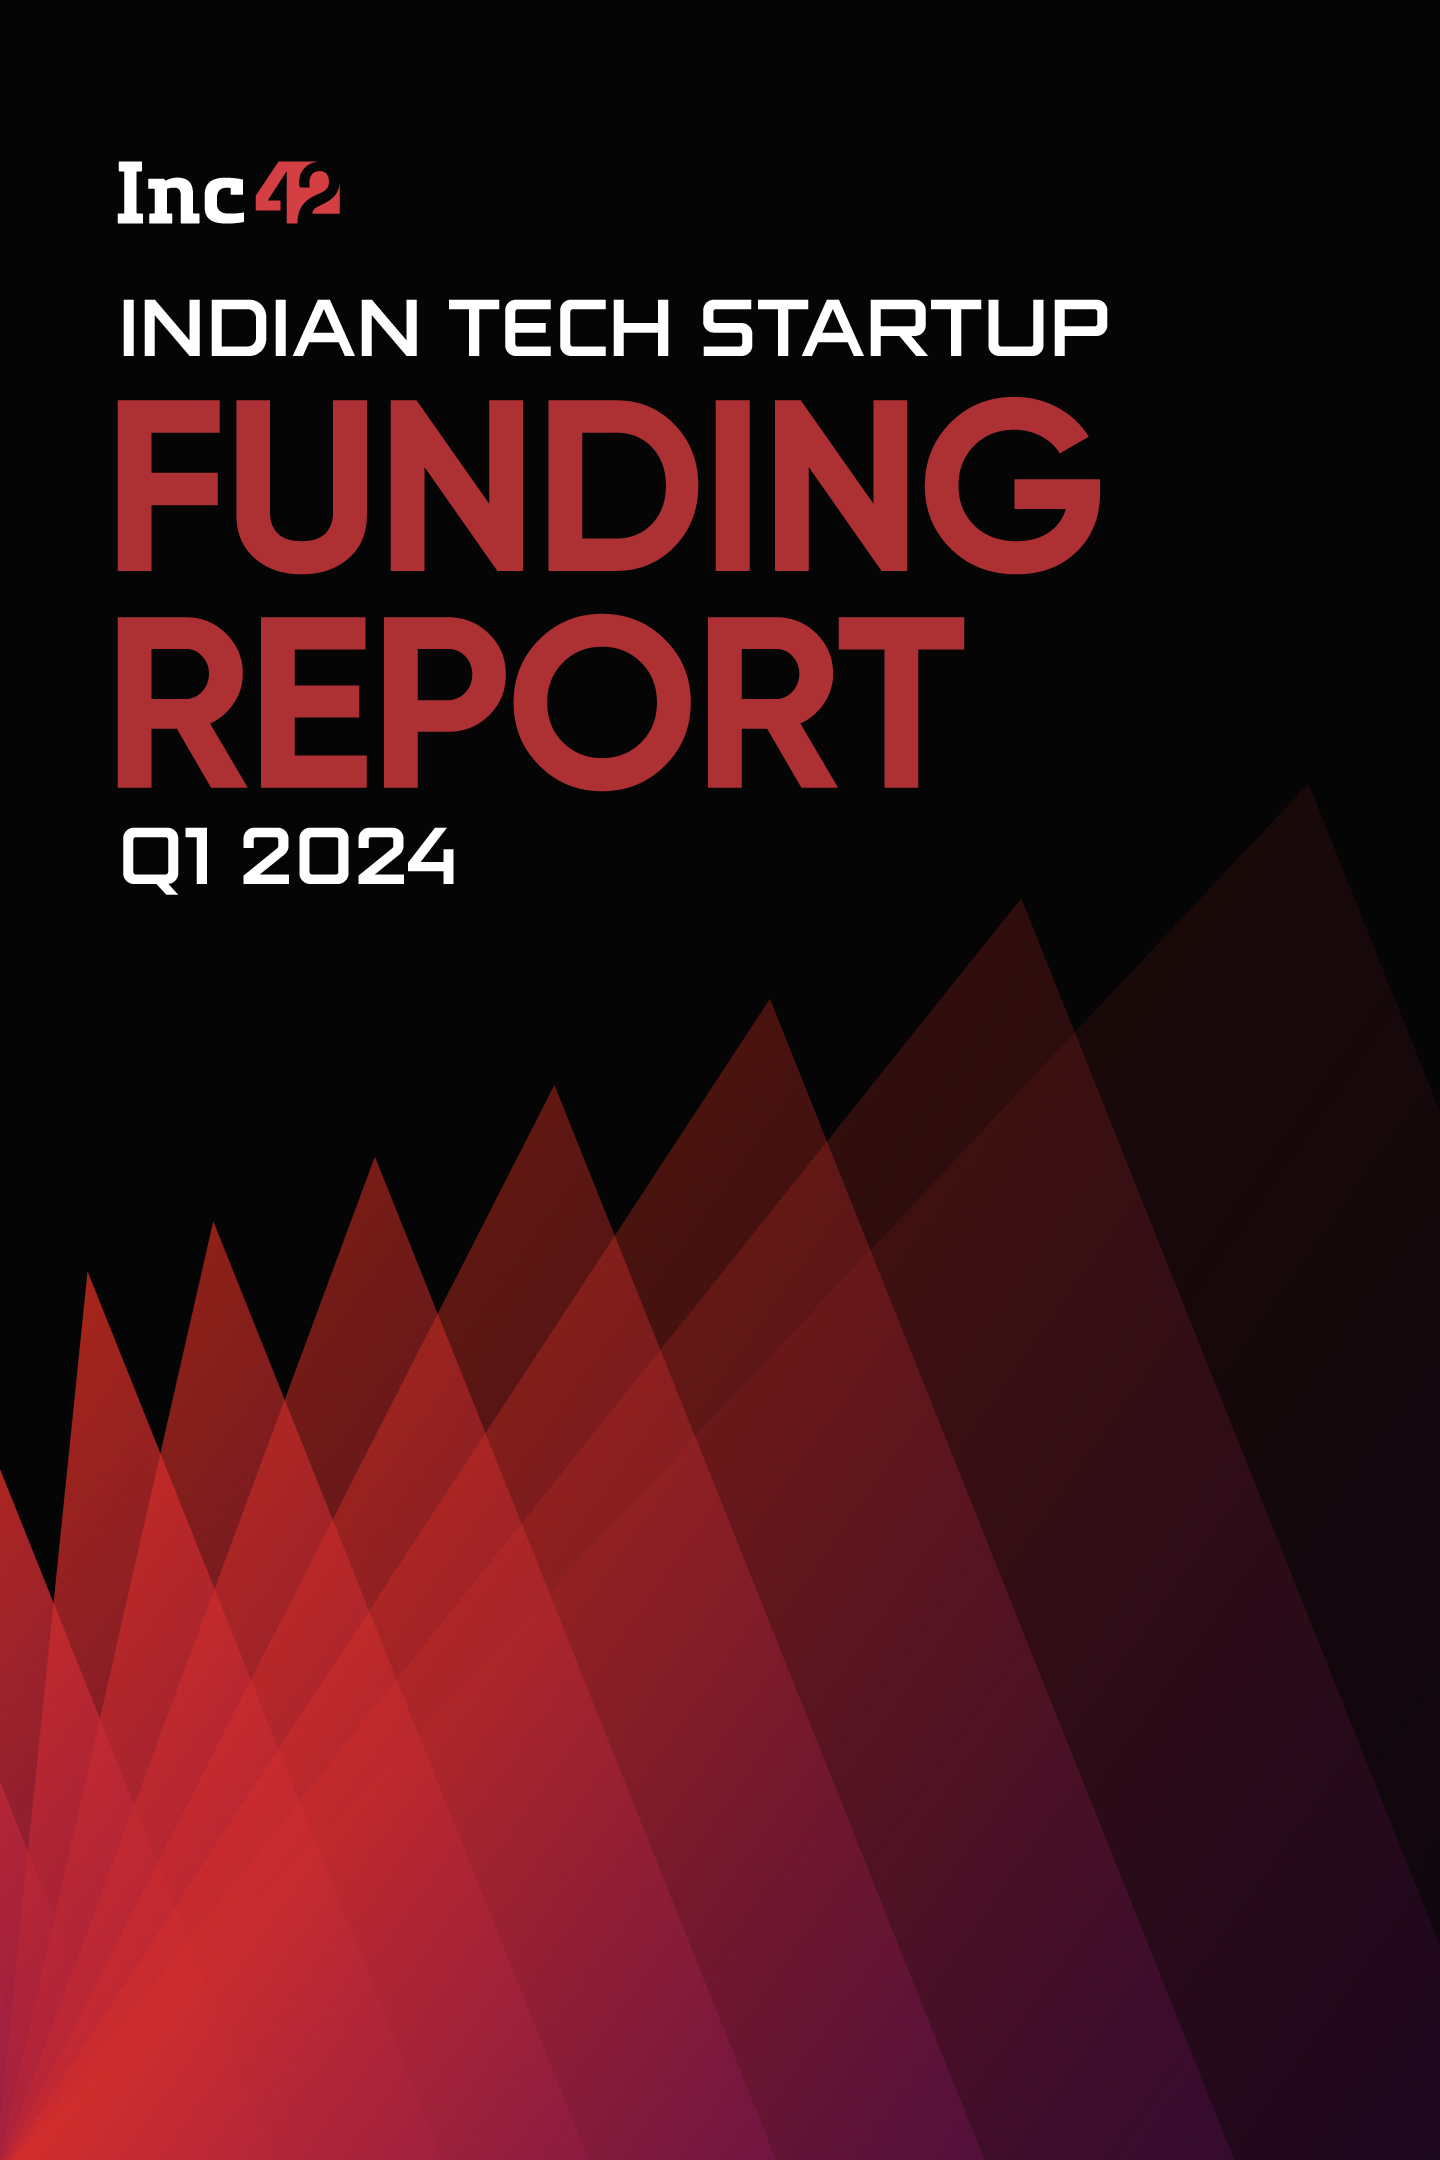 Indian Tech Startup Funding Report Q1 2024